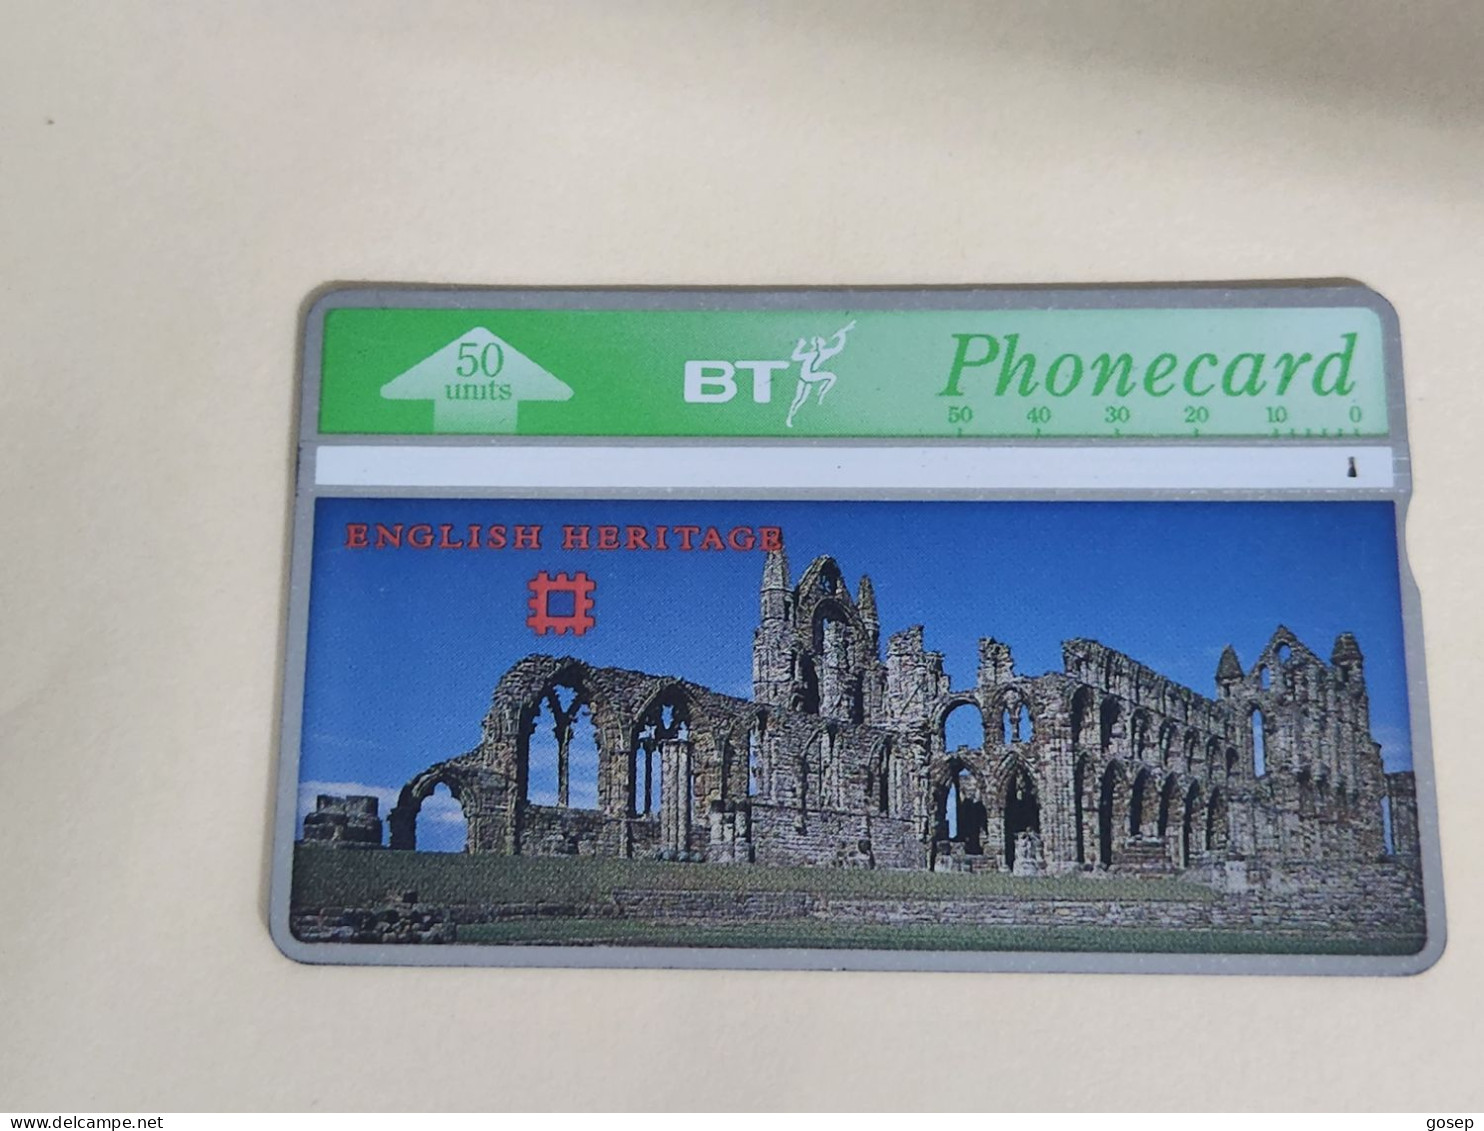 United Kingdom-(BTA112)-HERITAGE-Whitby Abbey-(195)(50units)(528D77140)price Cataloge3.00£-used+1card Prepiad Free - BT Publicitaire Uitgaven